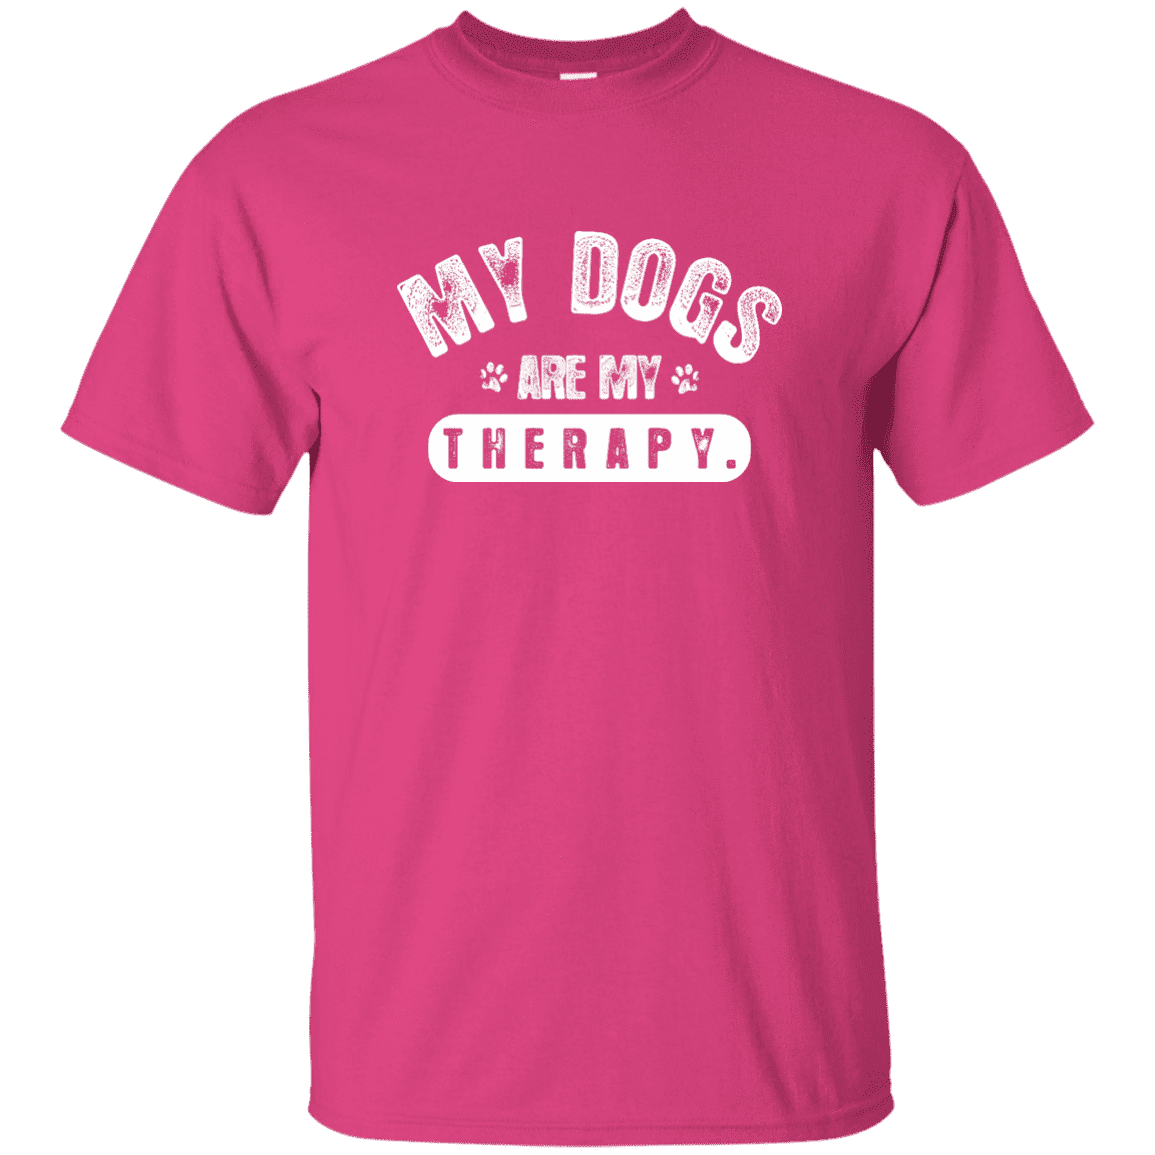 My Dogs Are My Therapy - T Shirt.